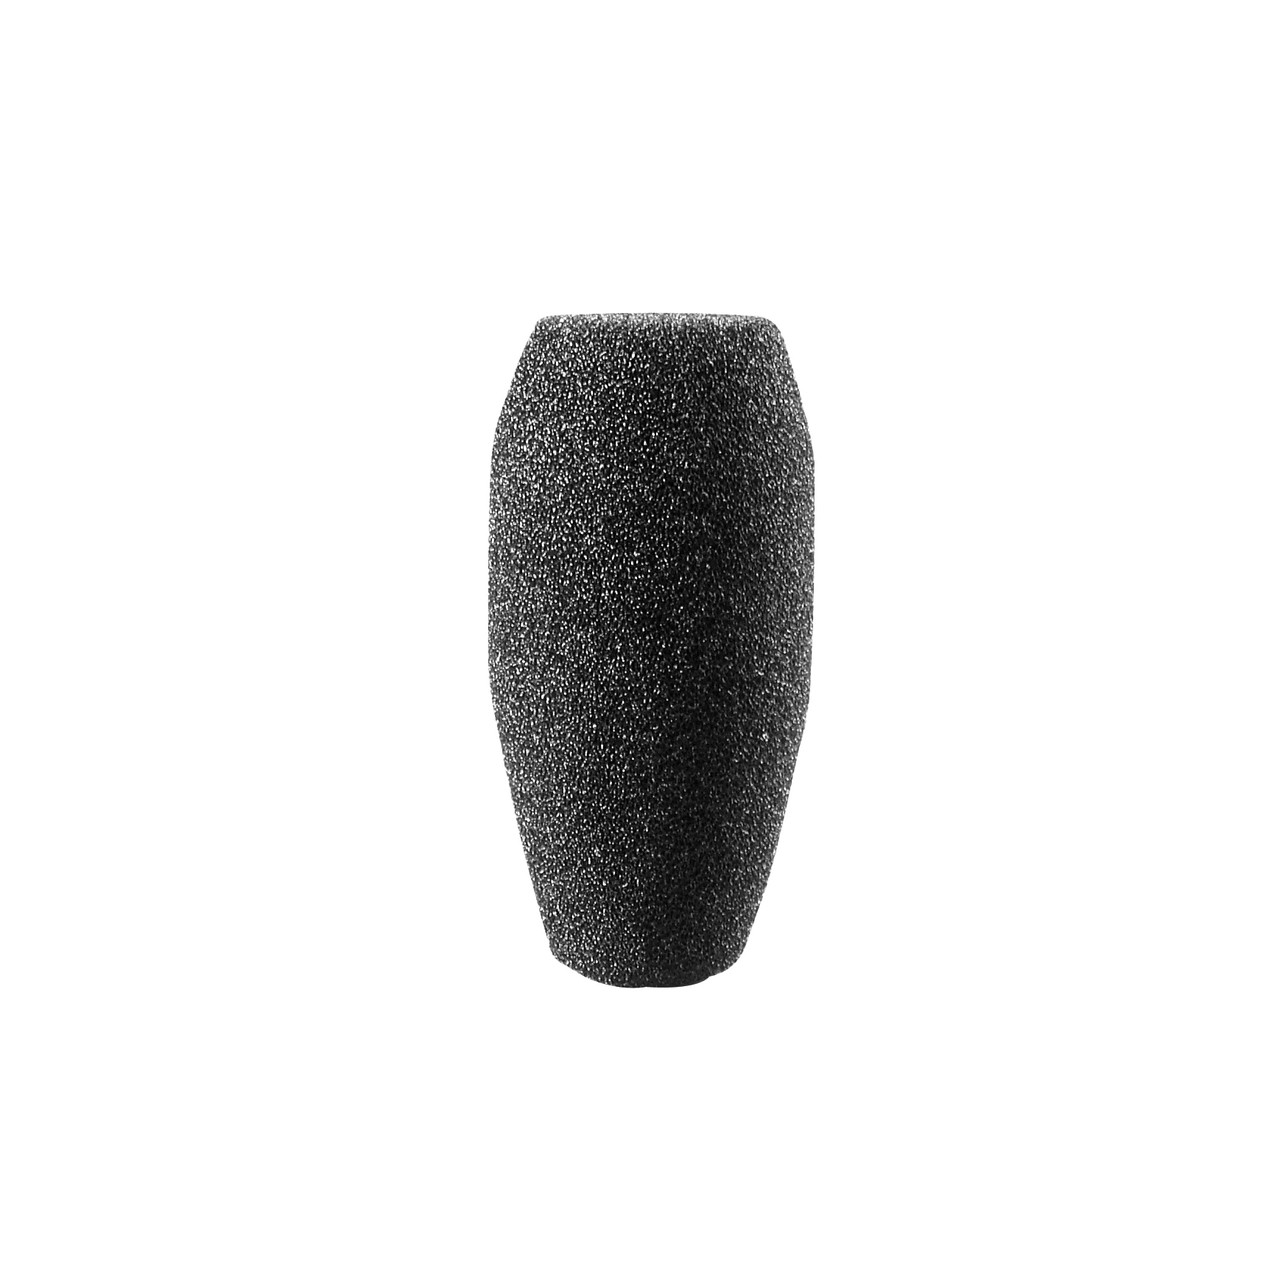 Audio-Technica AT8146 Microphone Windscreen for Pro49 Q